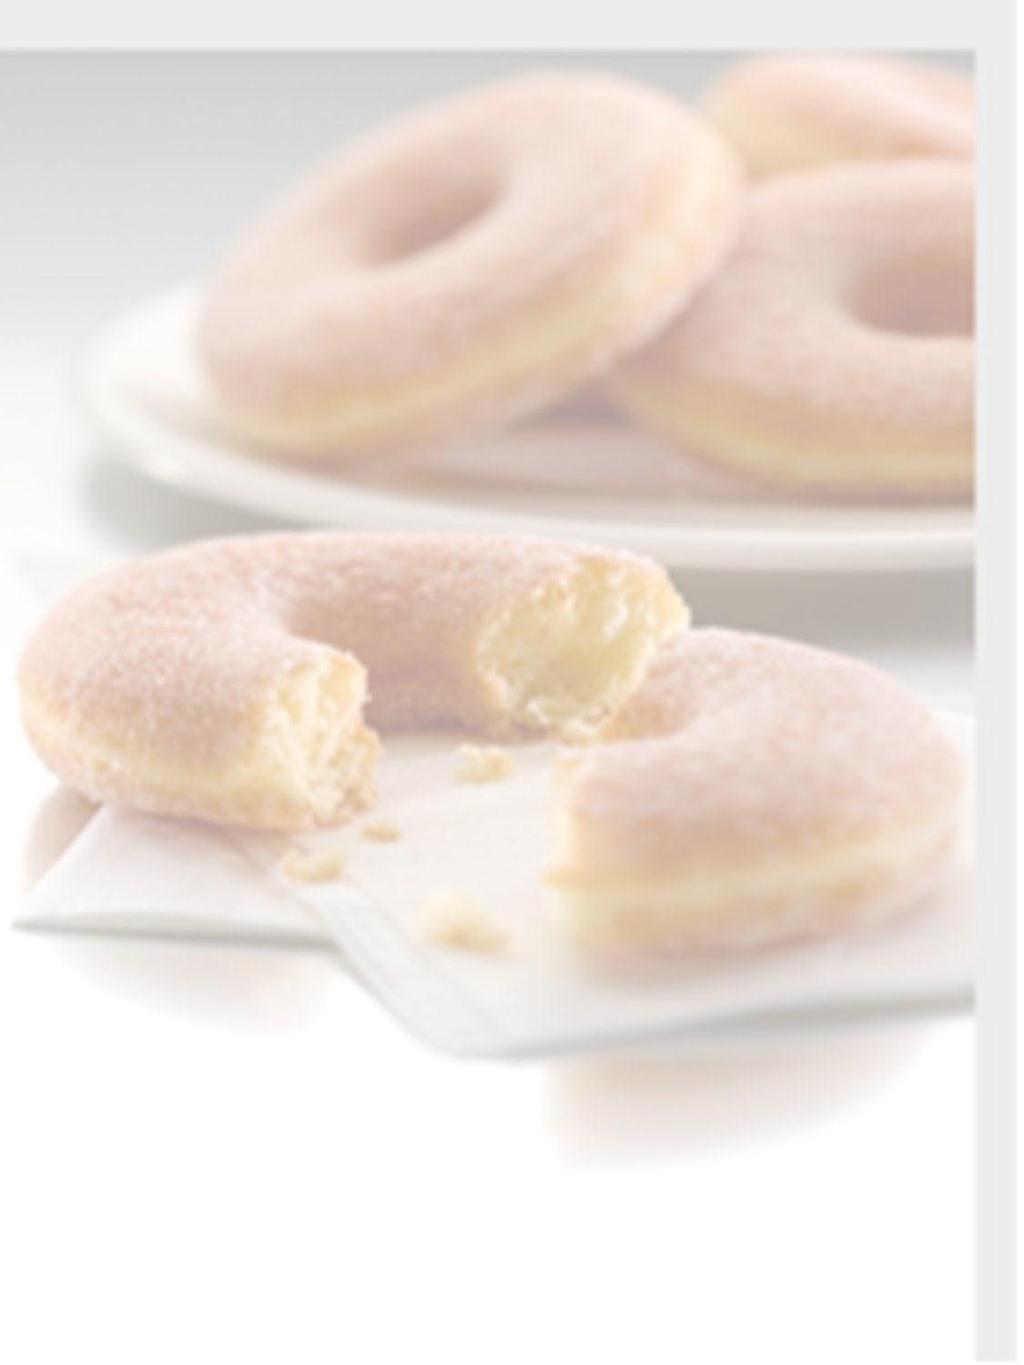 PRODUCT DESCRIPTION American Donut (Frozen Yeast Raised Donut) has unique characteristics, ready to decorate product which allows us to create delicious combinations of coatings and toppings making